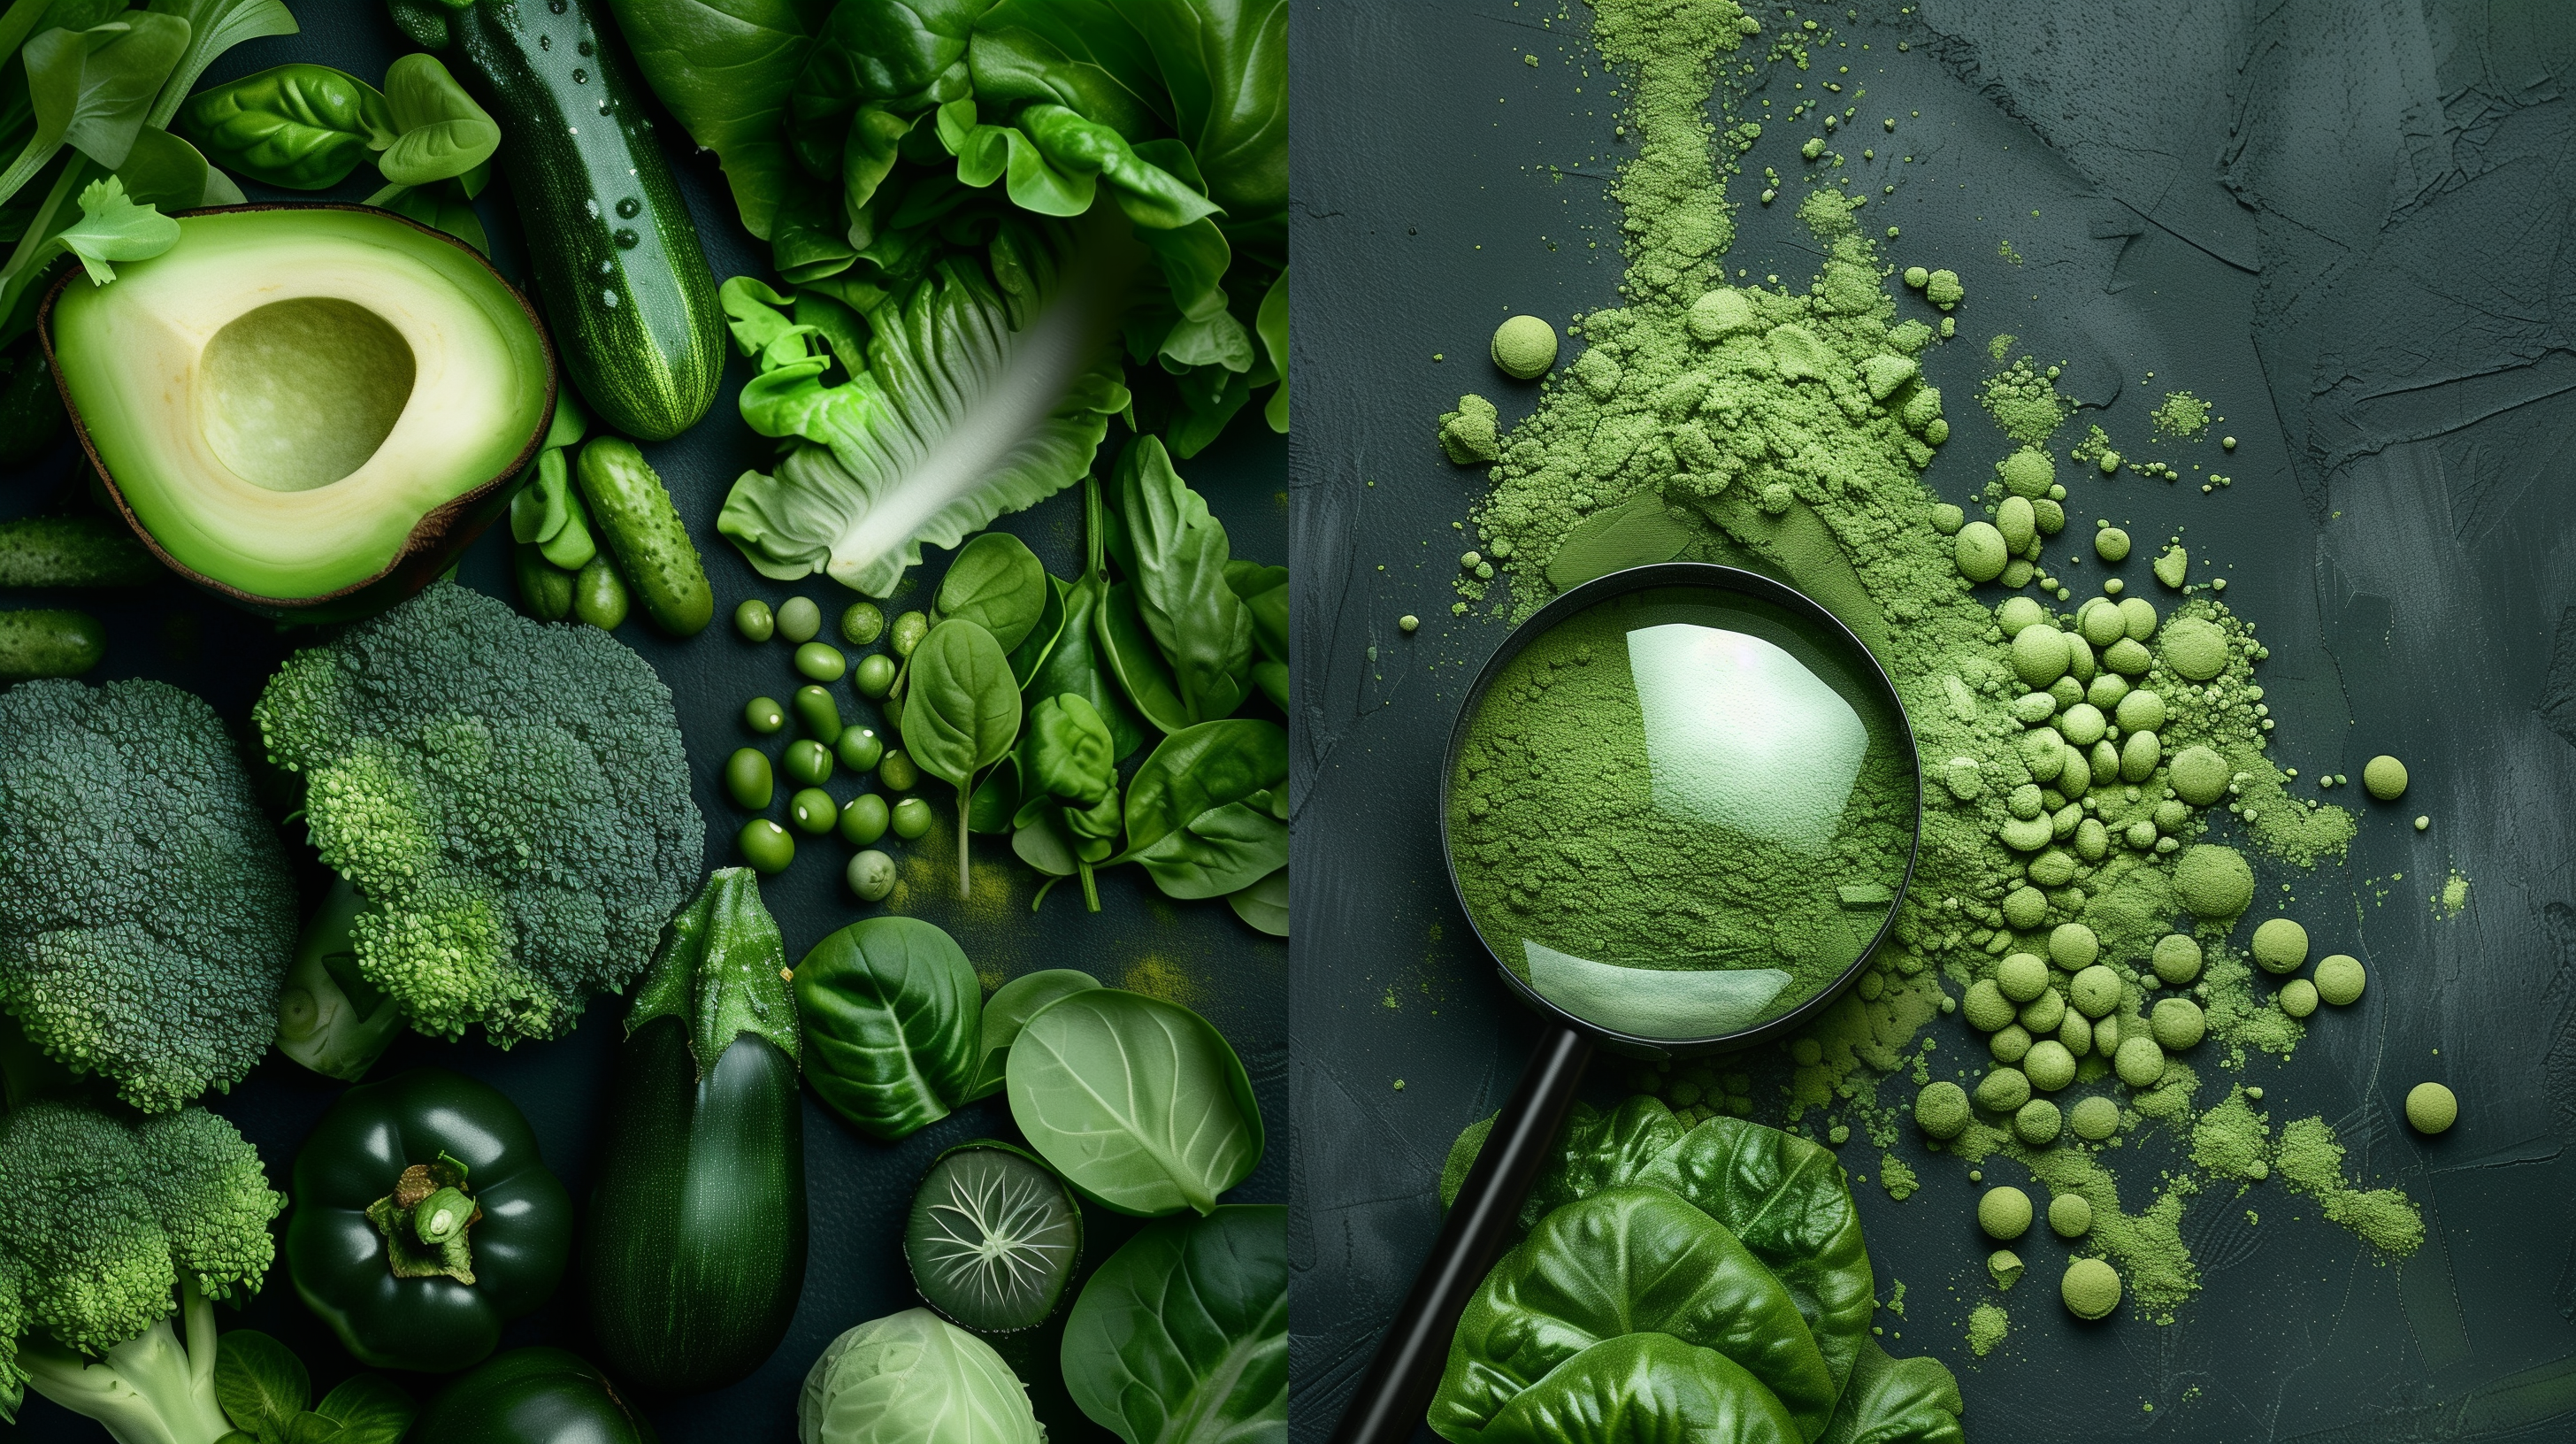 split-view: one side with vibrant, lush green vegetables and the other with a magnifying glass focusing on green powder